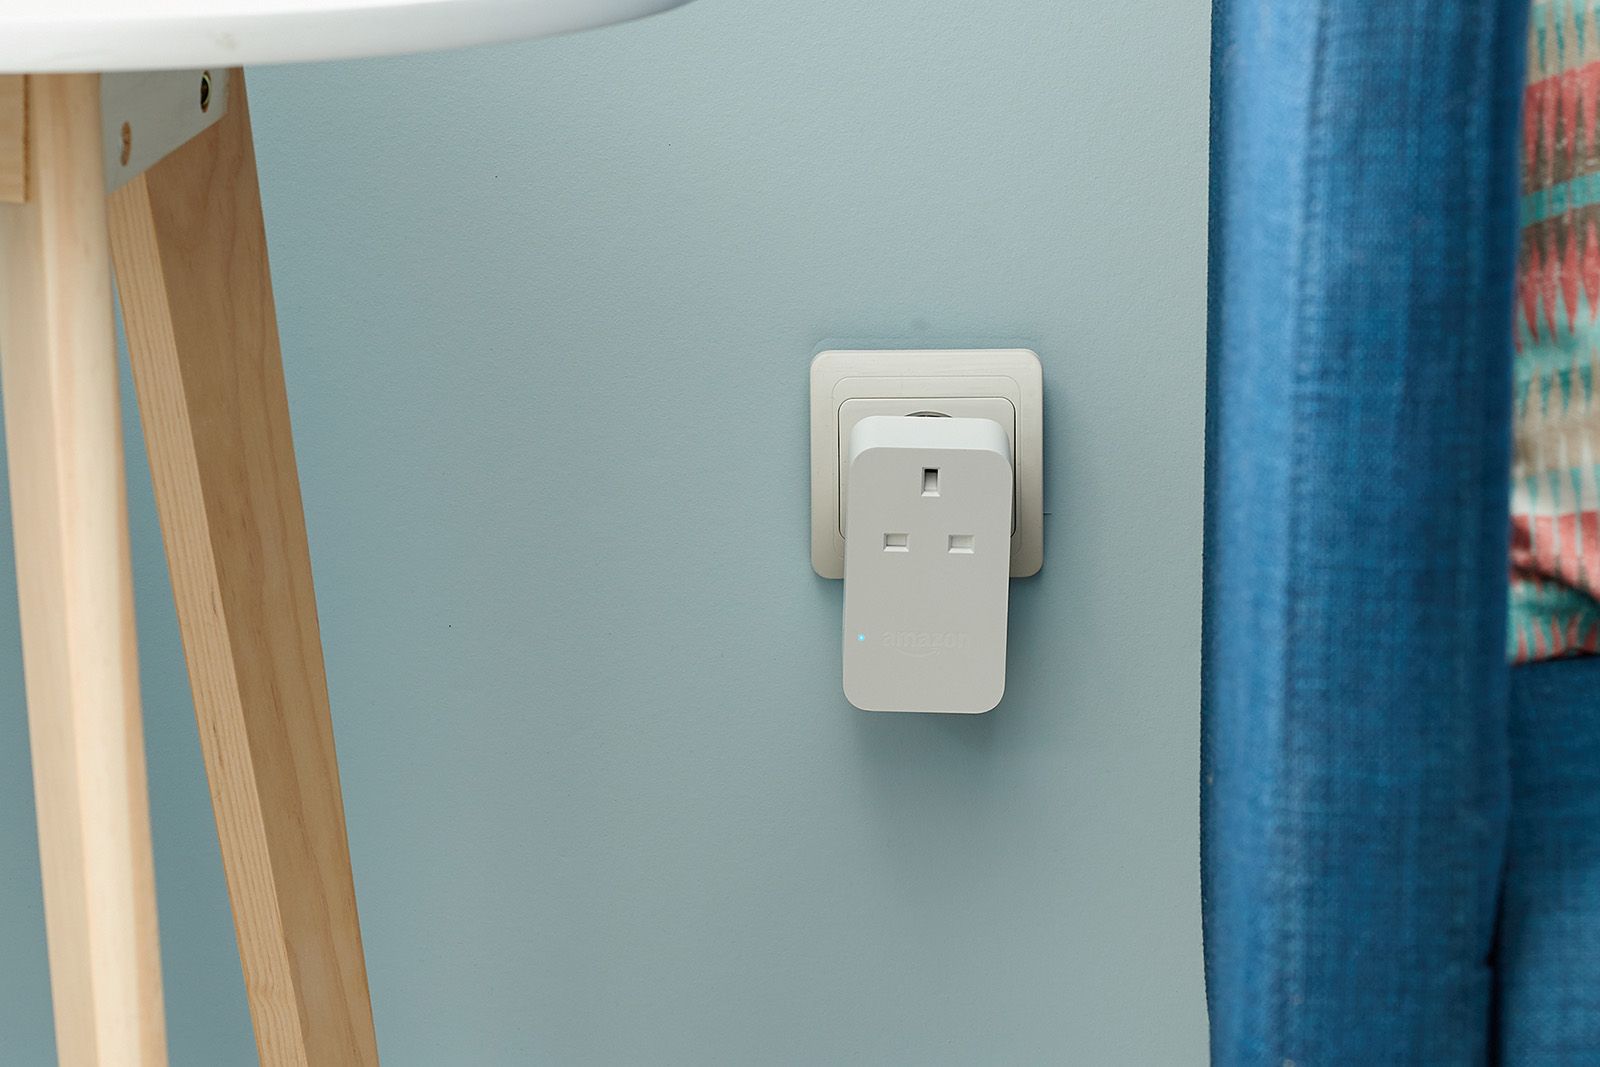 Amazon Smart Plug adds Alexa voice control to any electrical device image 1